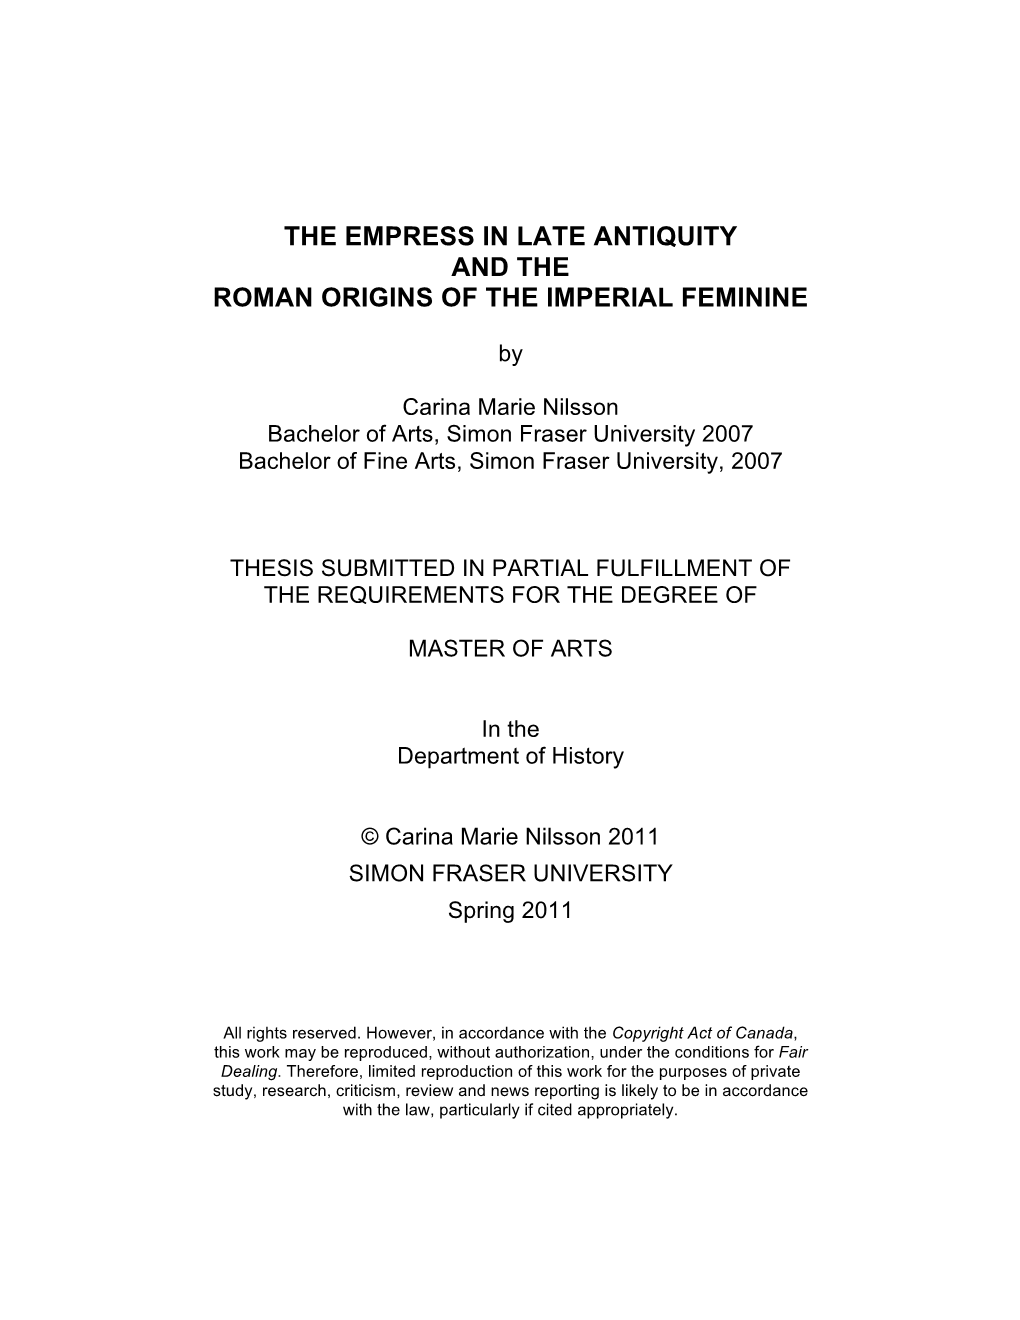 The Empress in Late Antiquity and the Roman Origins of the Imperial Feminine